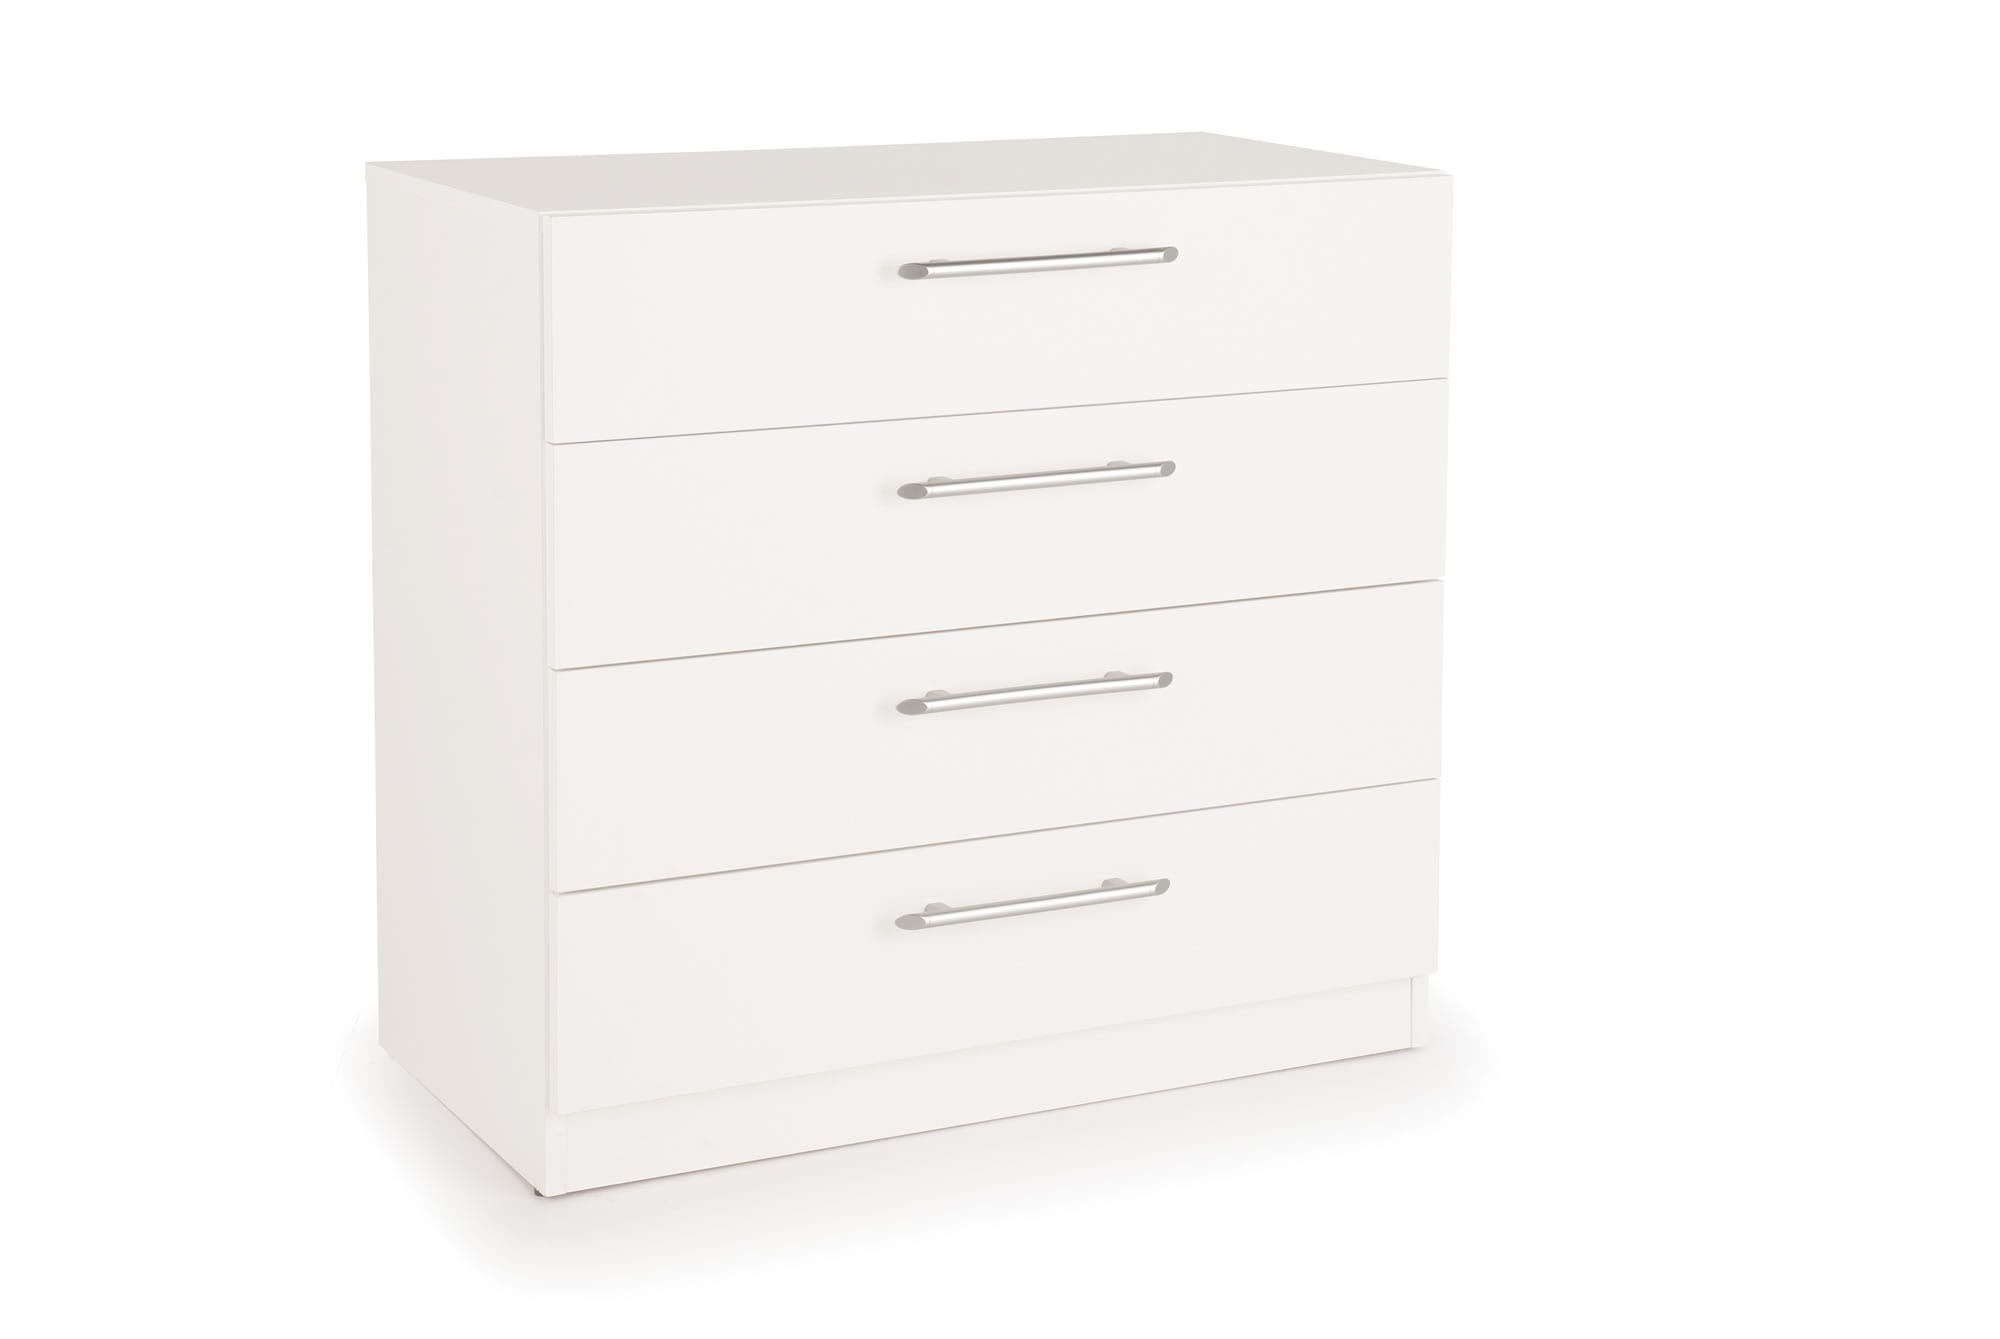 Eitan Bedroom 4 Drawer Chest - Variety Of Colours